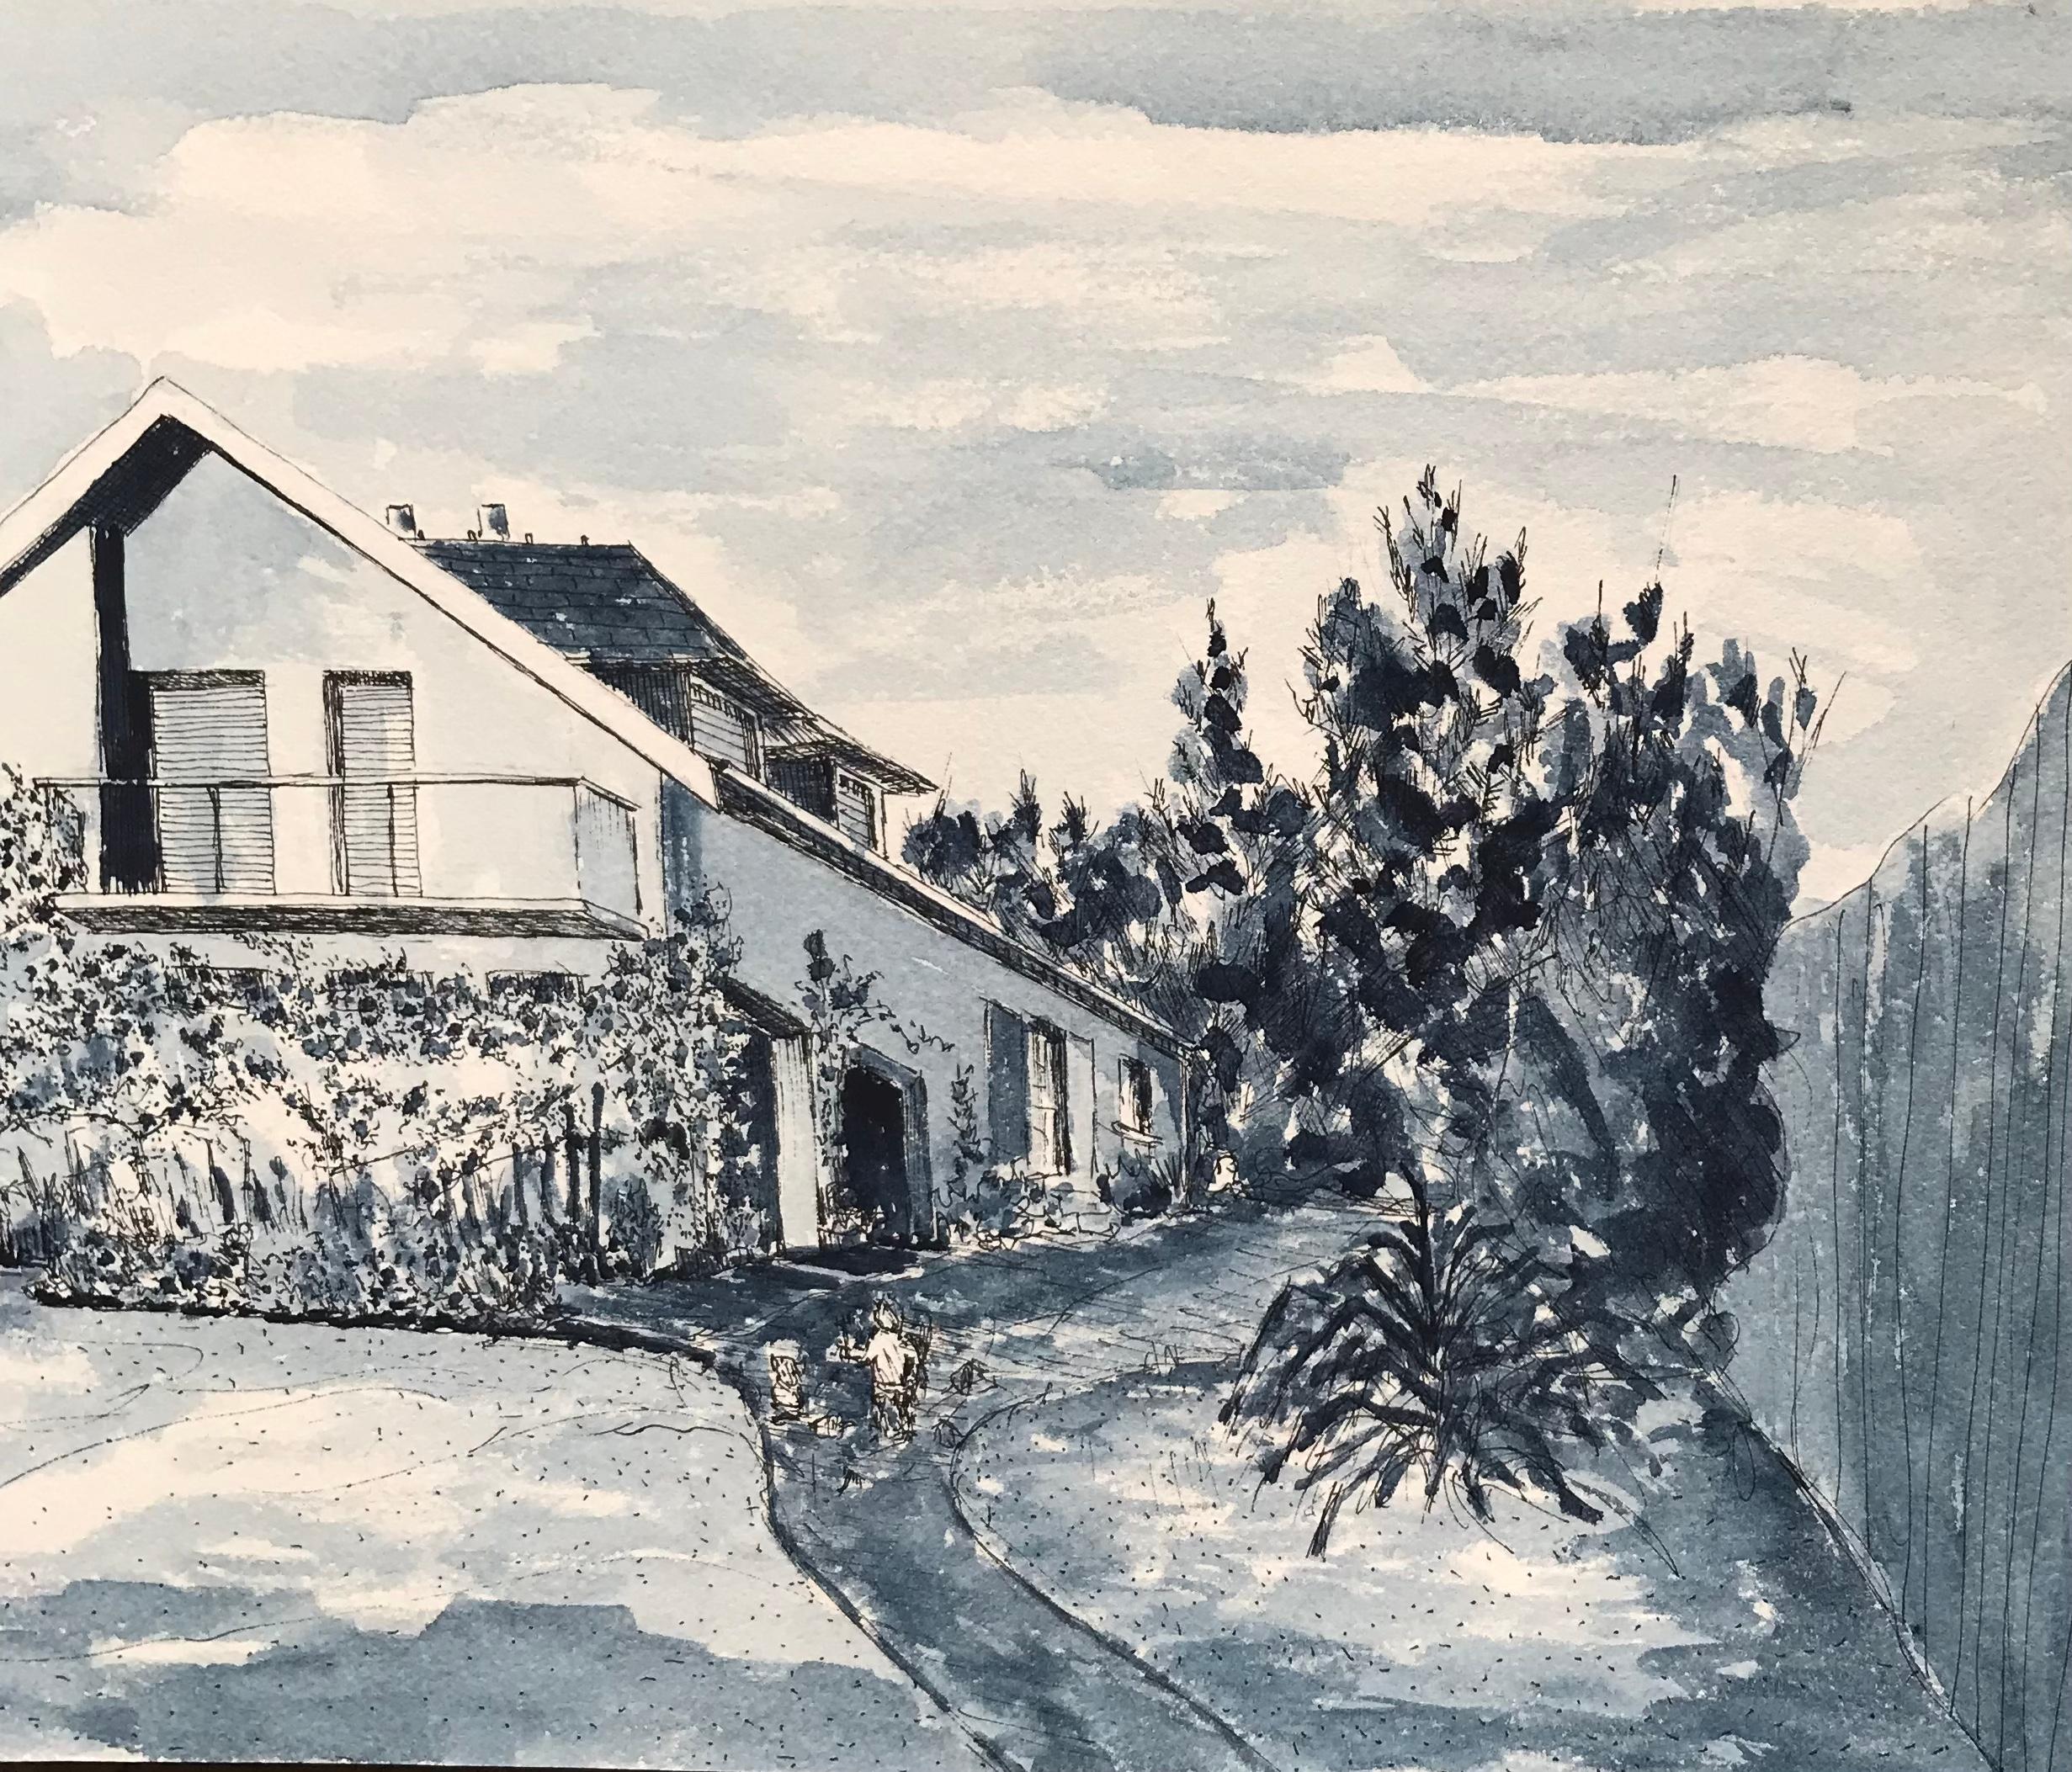 French Landscape
by Bernard Labbe (French mid 20th century)
original watercolour on artist paper, unframed
size: 7 x 11  inches
condition: very good and ready to be enjoyed. 

provenance: the artists atelier/ studio, France (stamped verso)